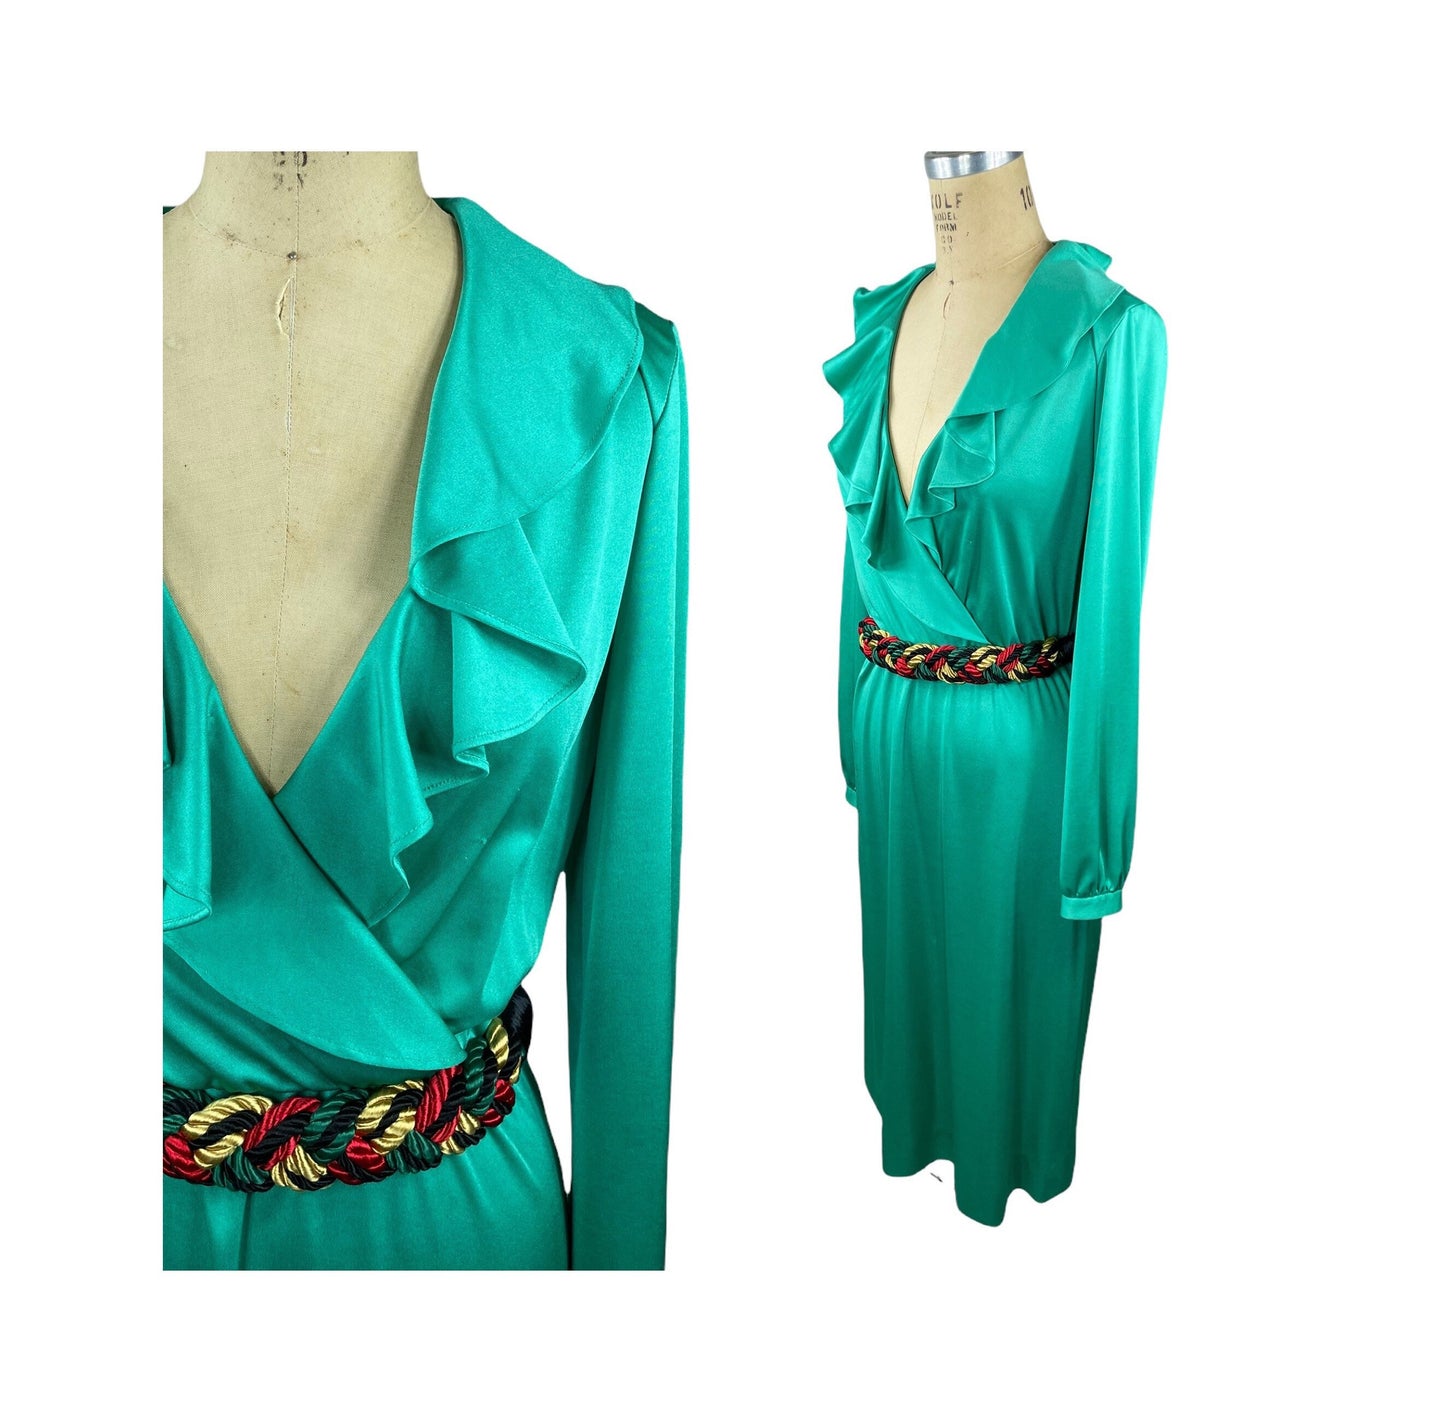 1970s silky green wrap dress with ruffled collar by Young Traditions Size M